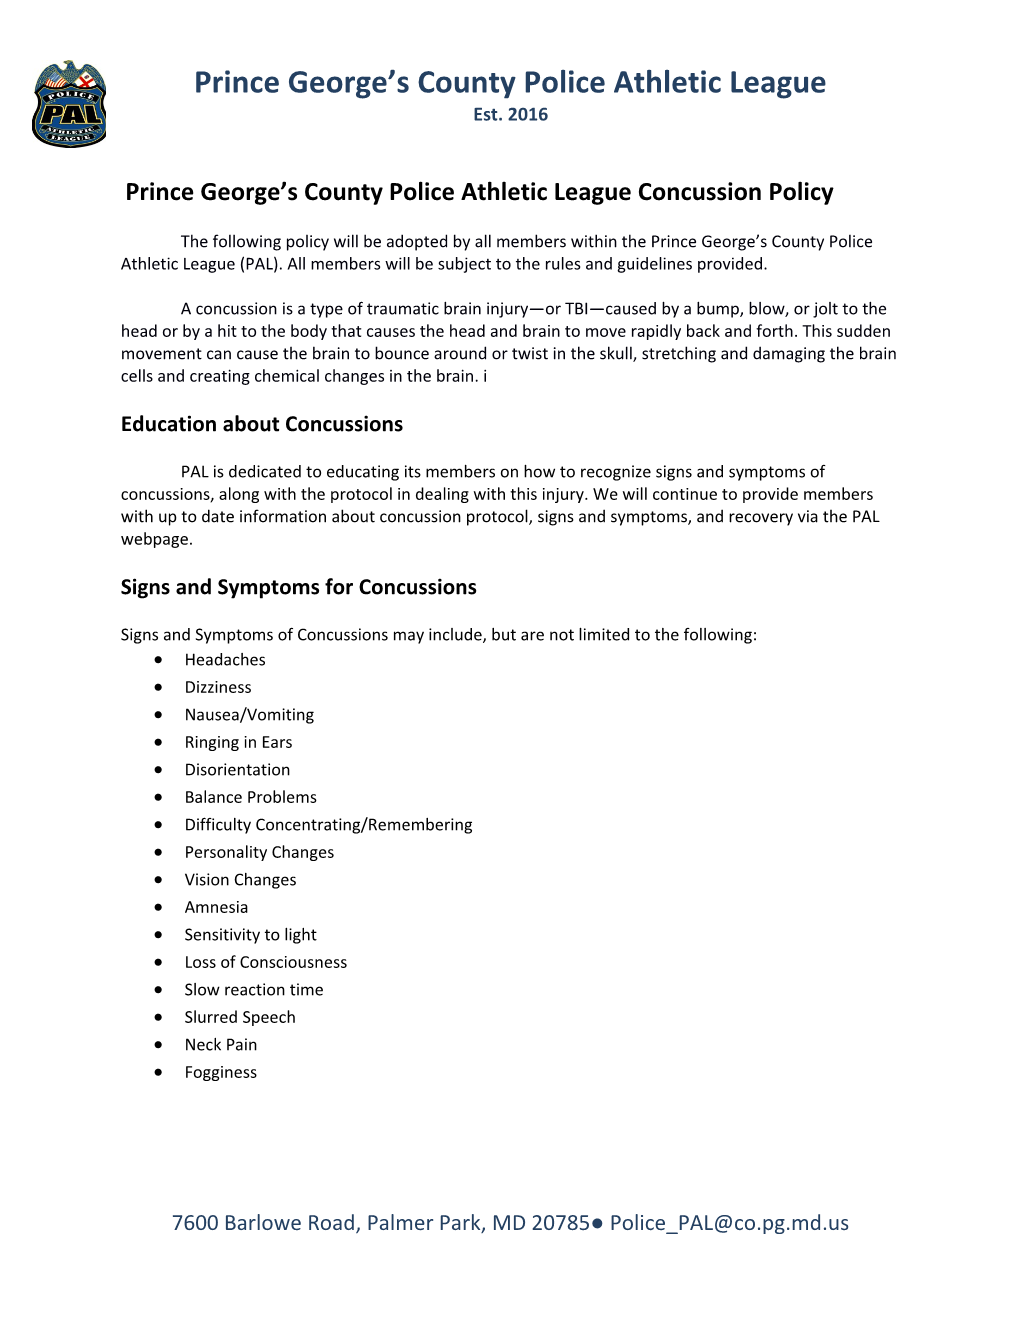 Prince George S County Police Athletic League Concussion Policy